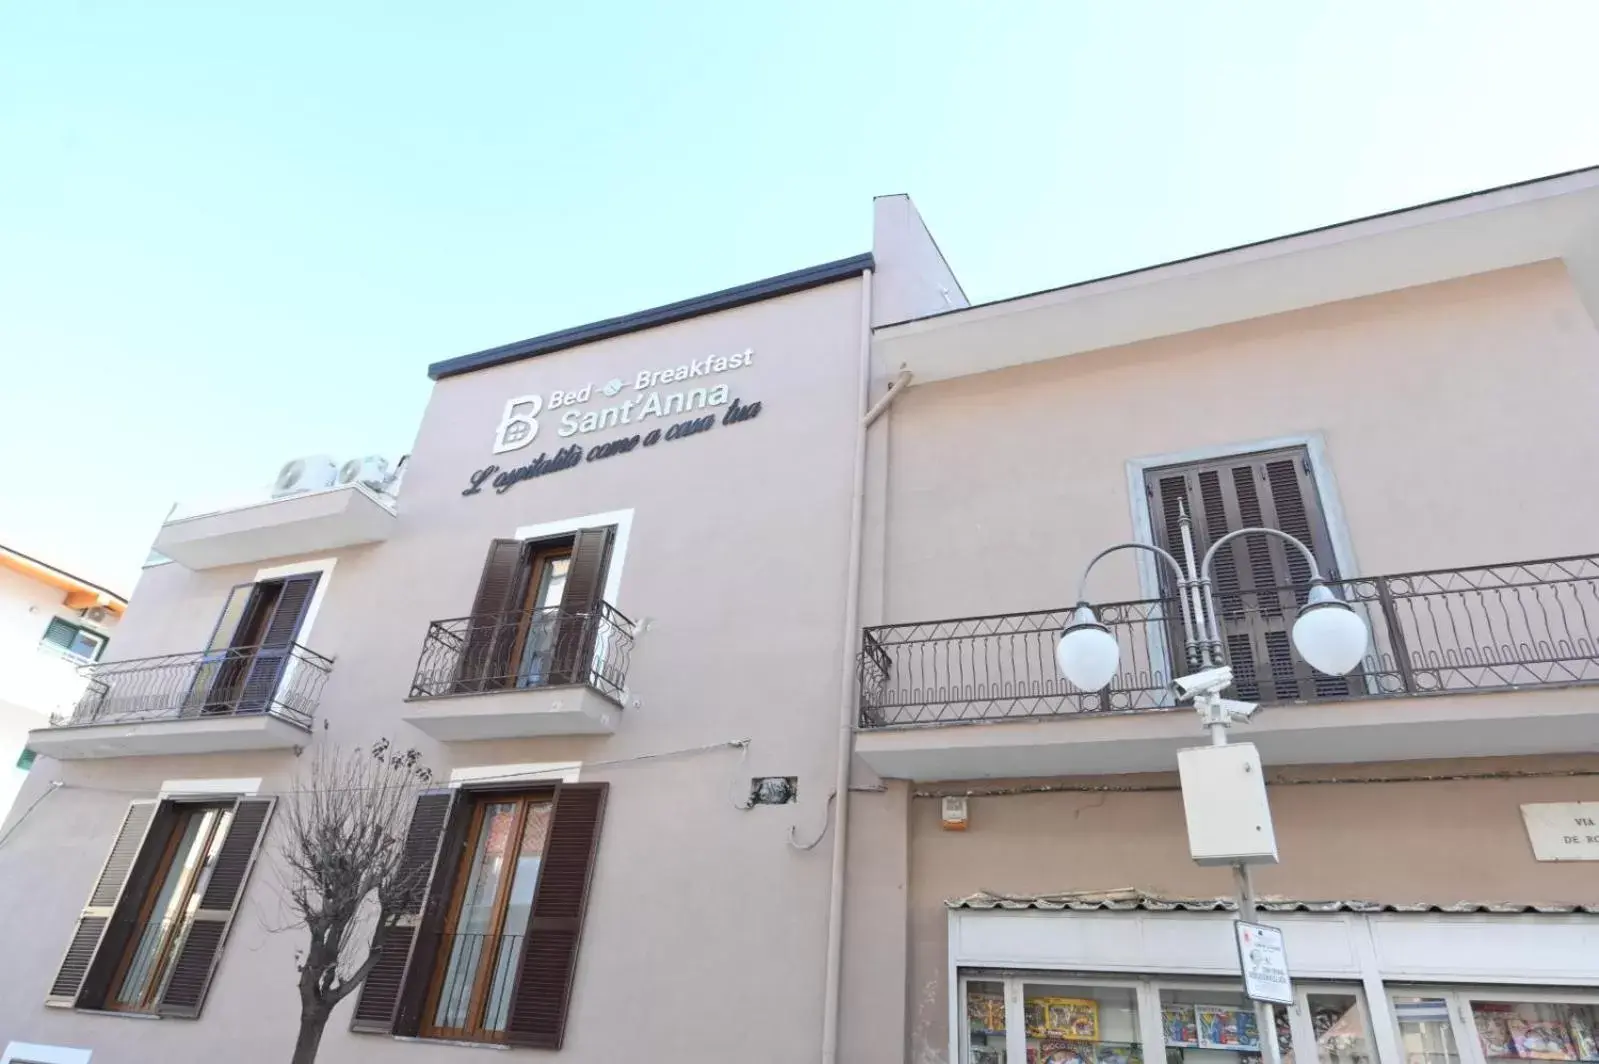 Property Building in Bed And Breakfast Sant'Anna